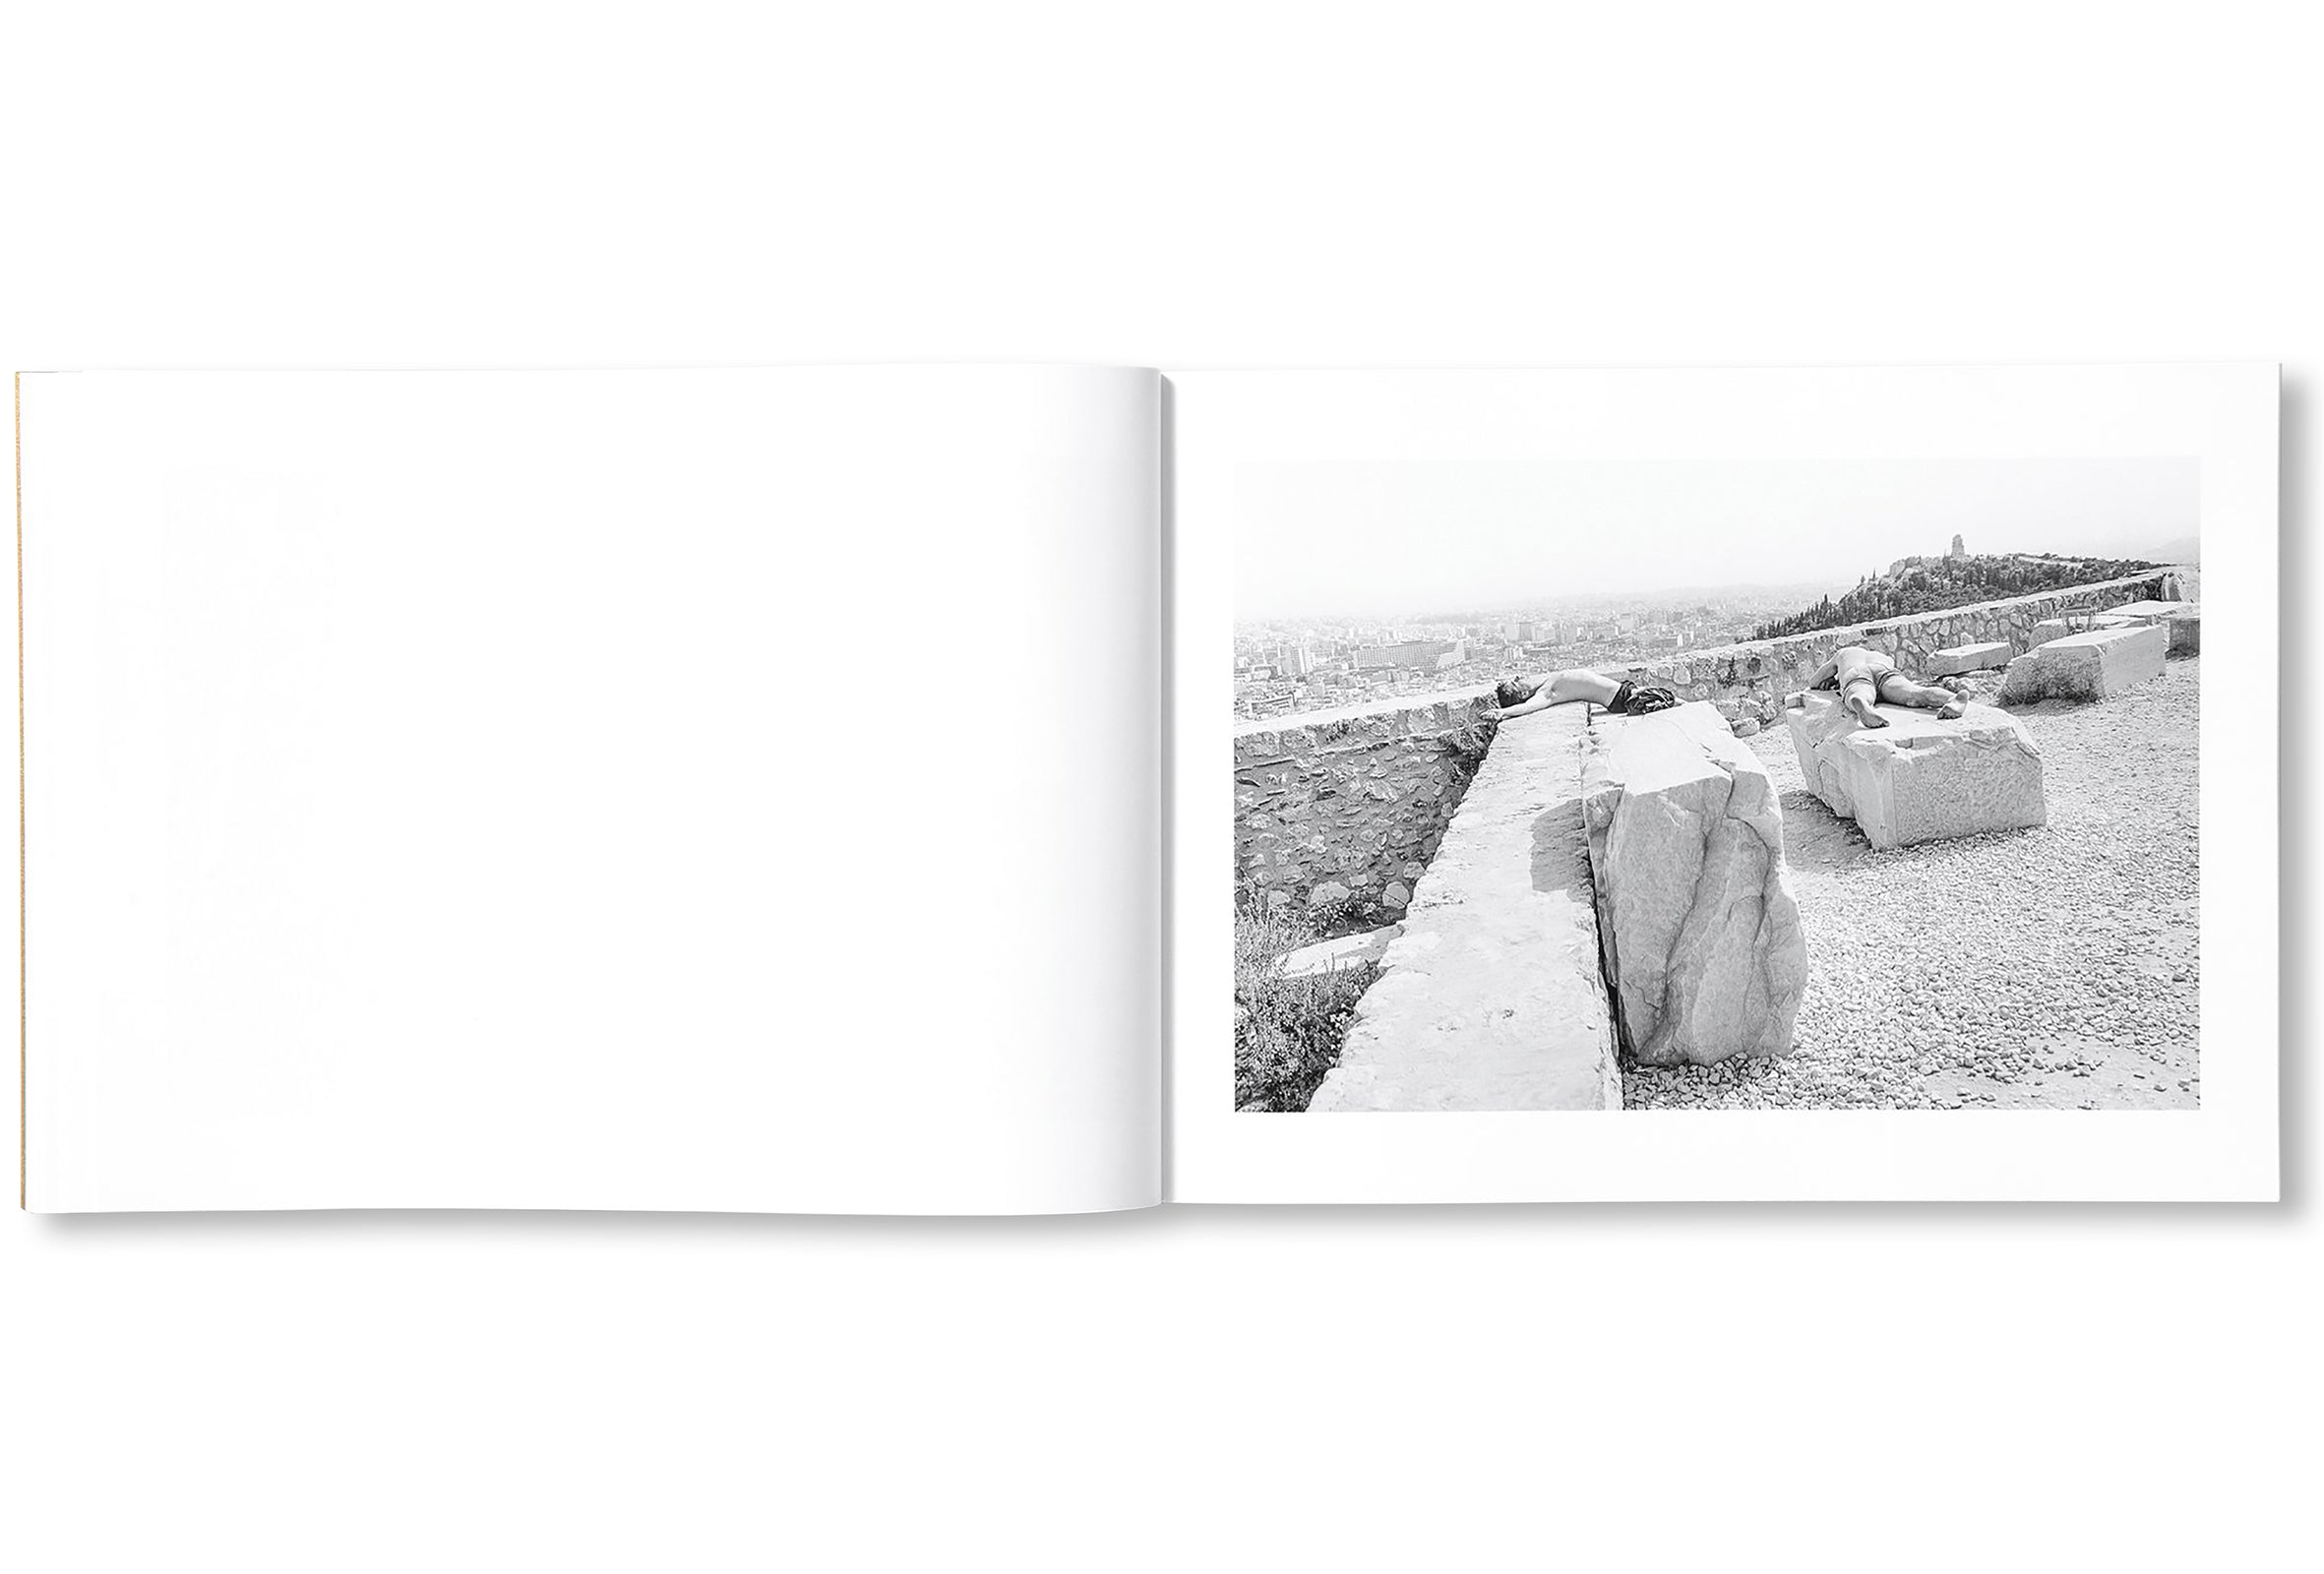 ON THE ACROPOLIS by Tod Papageorge [SIGNED]